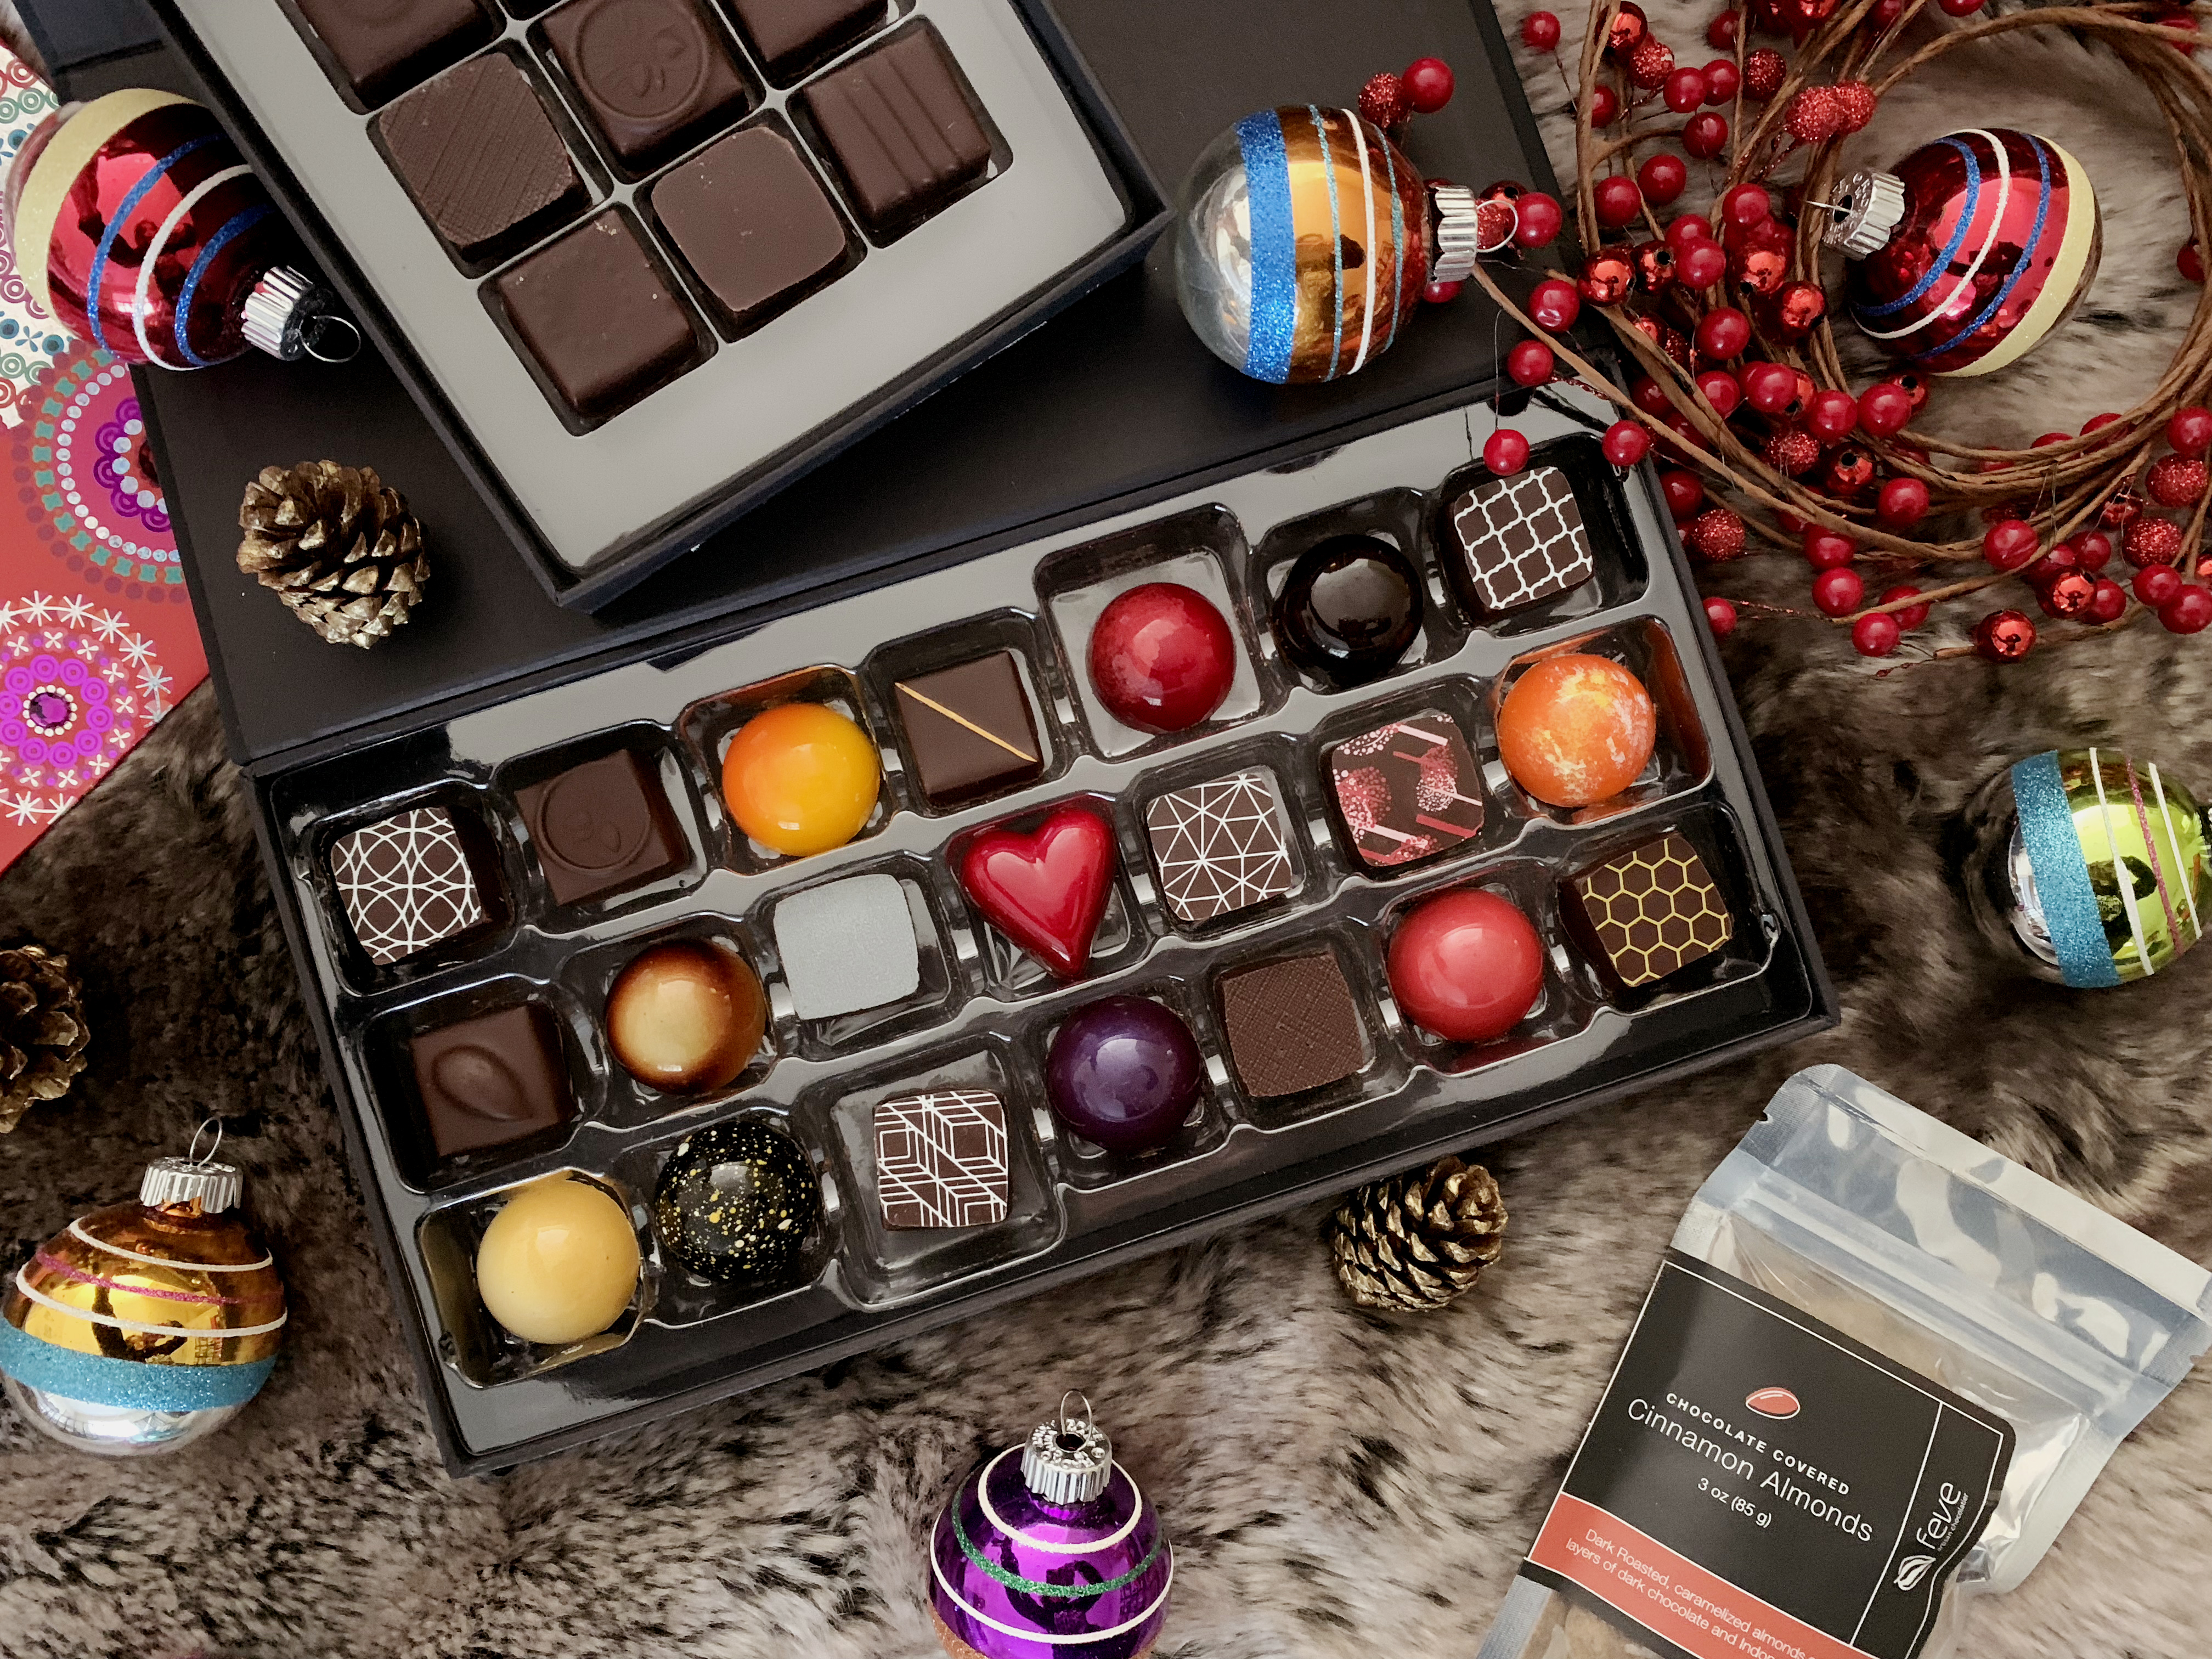 Chocolate Holiday Gifts for the sweet tooth this Christmas